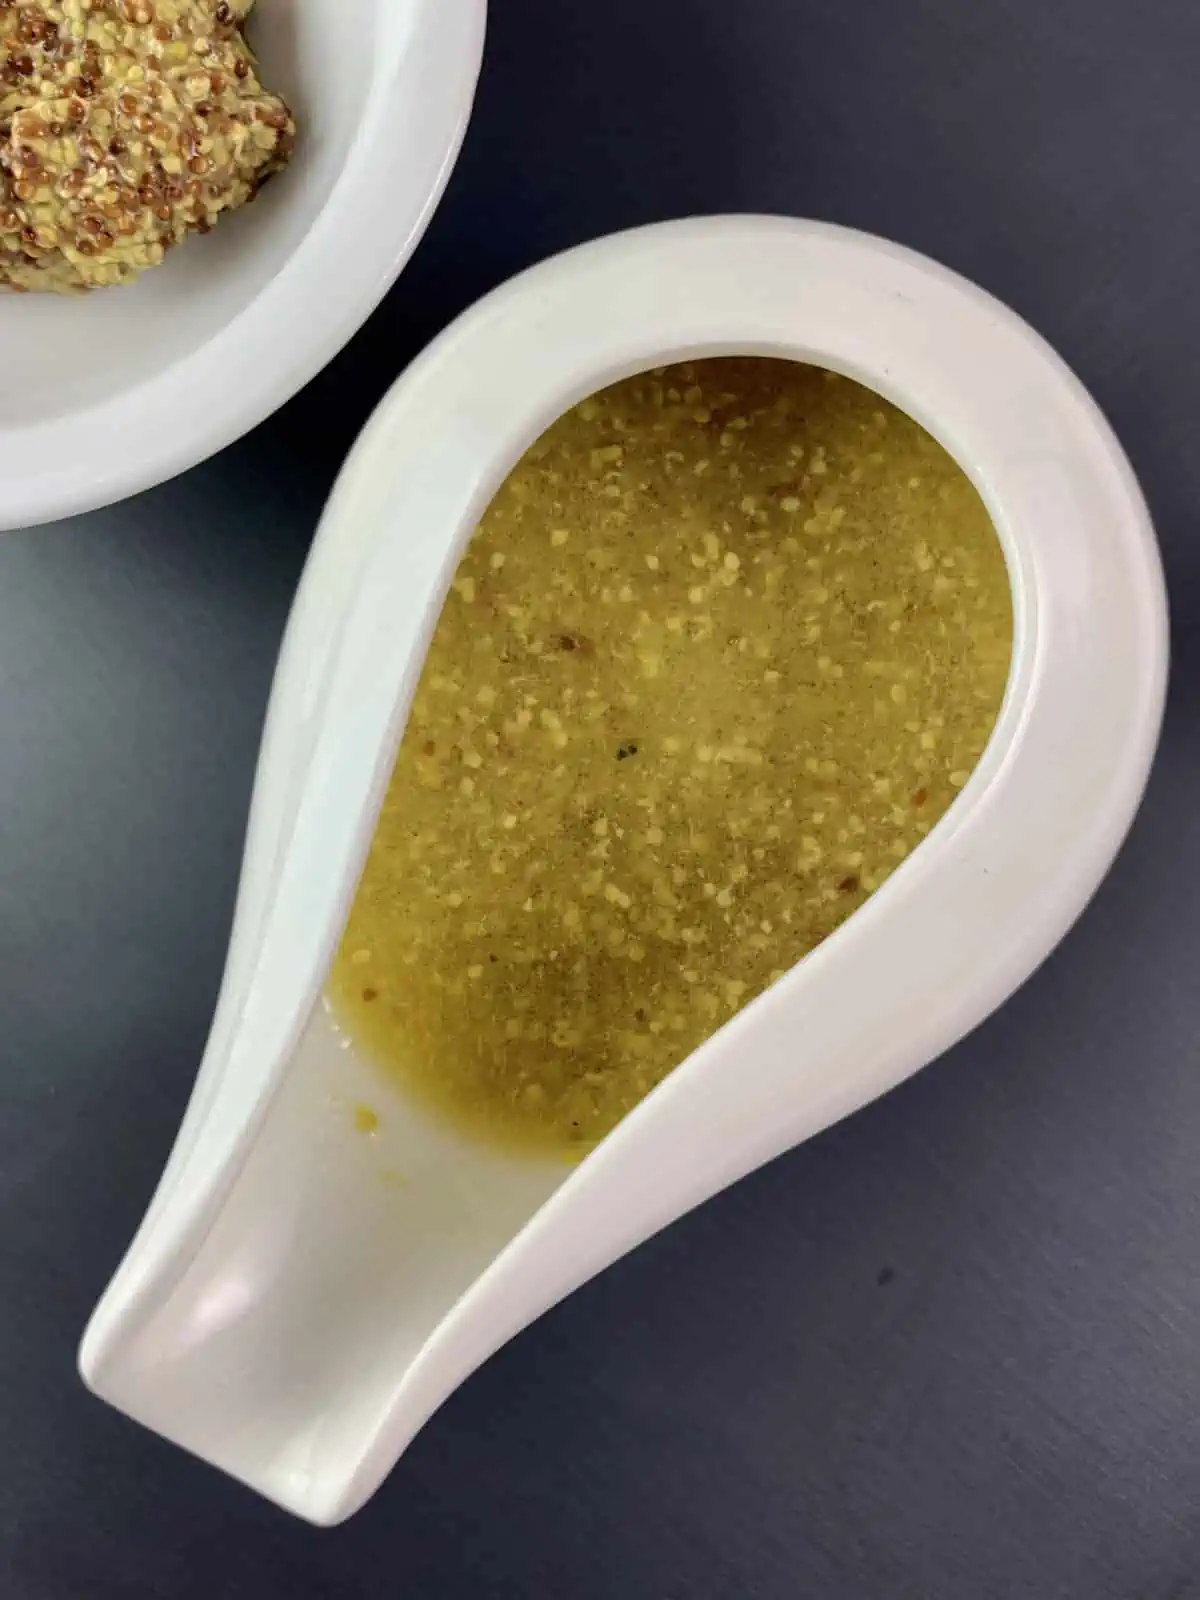 Honey mustard vinaigrette in a small white jug with wholegrain mustard on the side.